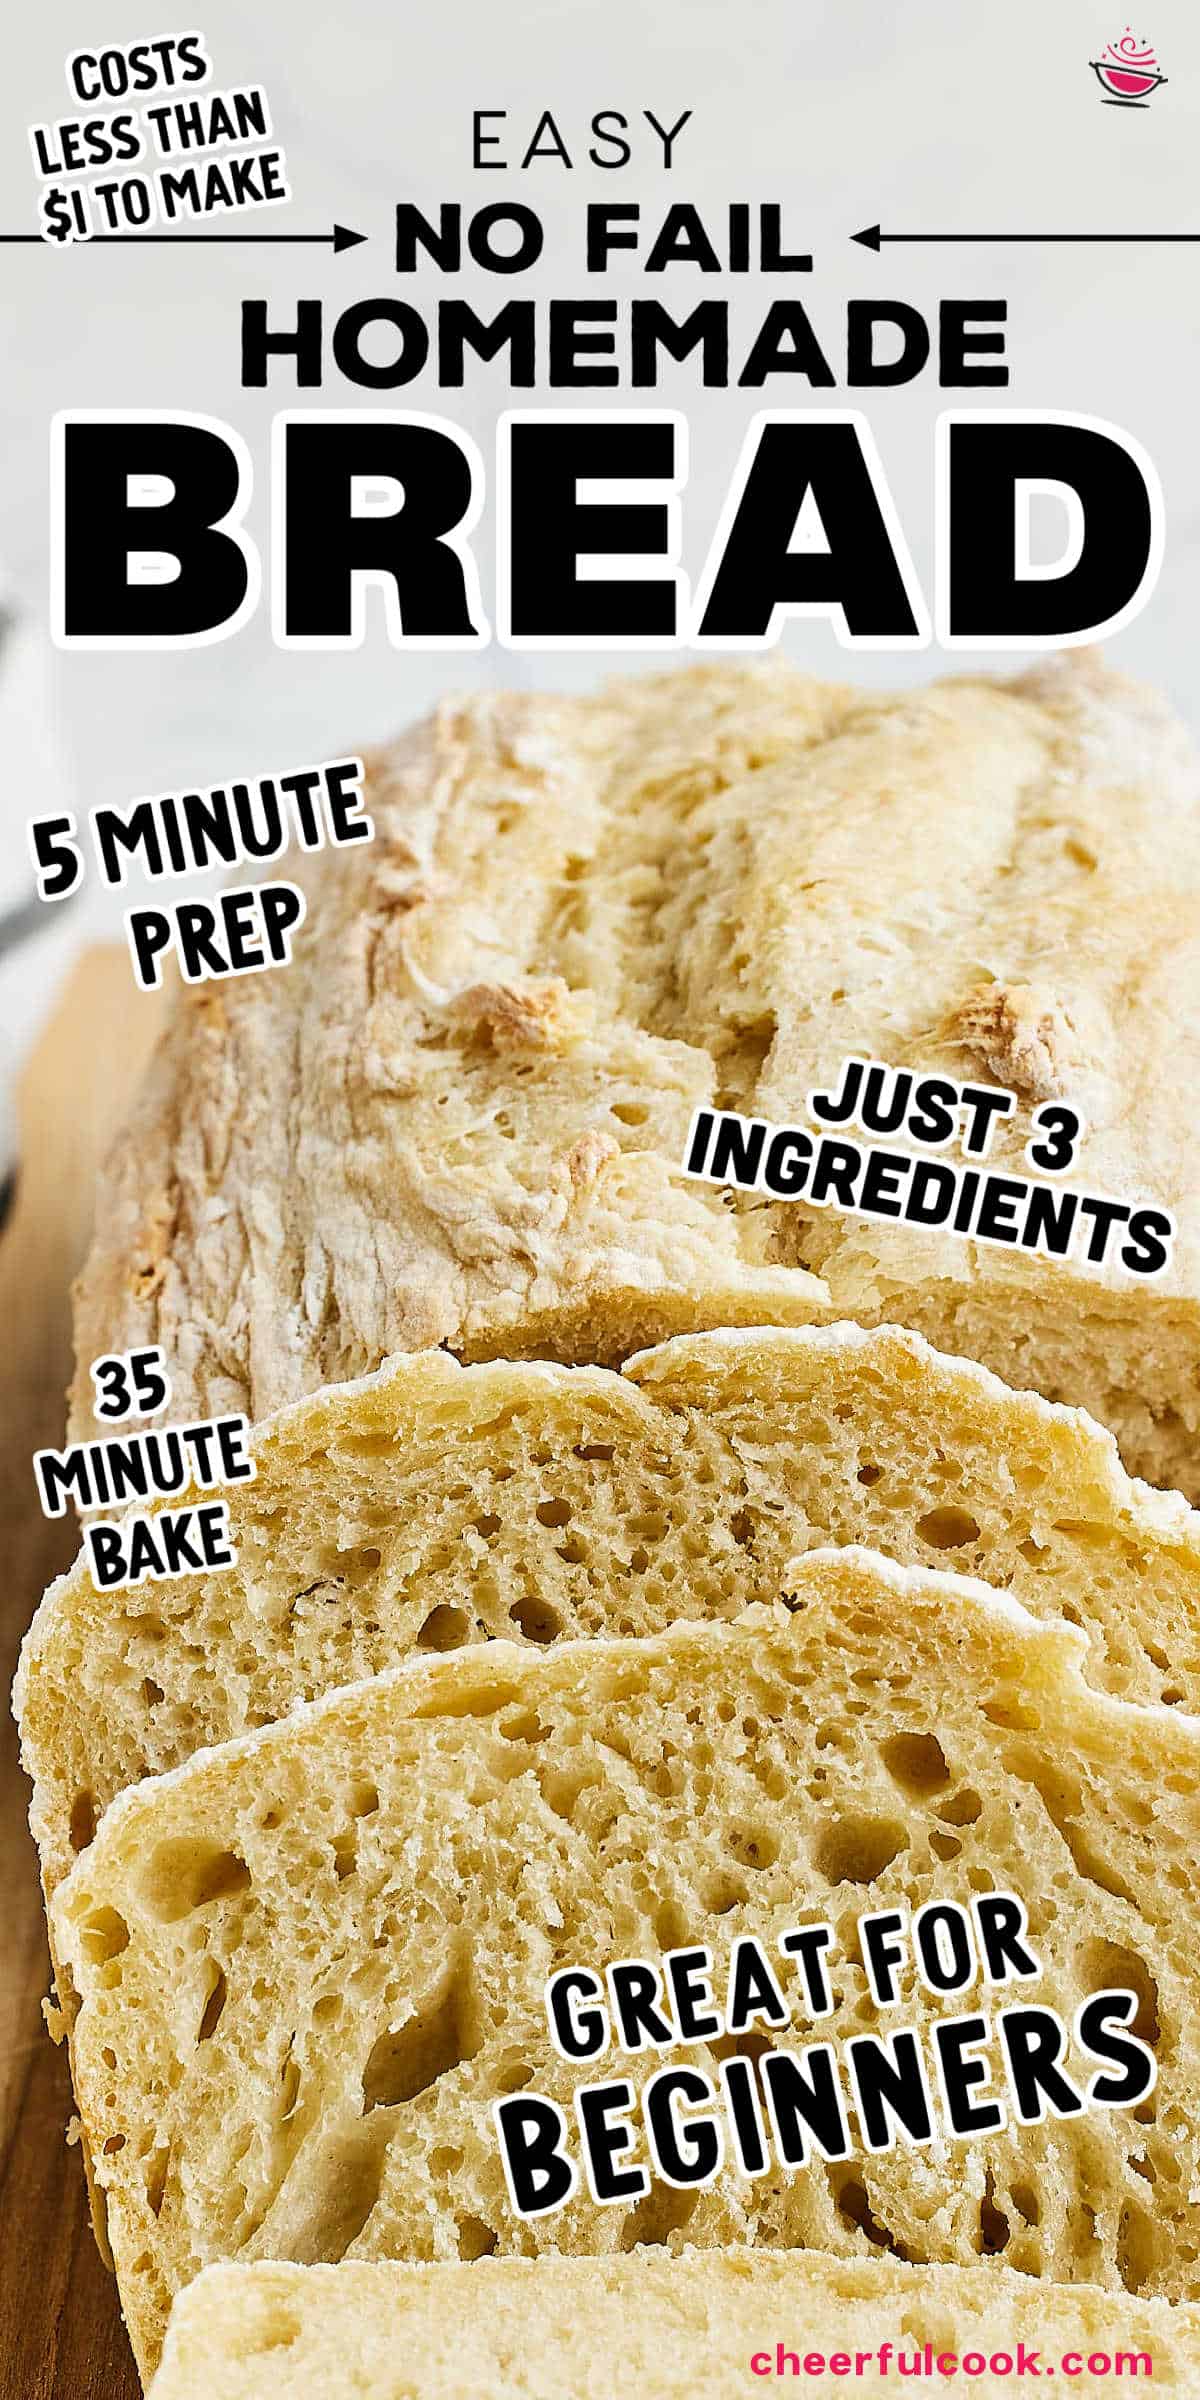 Do you want the secret to making heavenly homemade bread? You can make it yourself with just a few simple ingredients. So don't keep your taste buds waiting - get baking for an irresistibly crusty loaf of deliciousness! #cheerfulcook 
#bread #homemadebread #recipehomemade  via @cheerfulcook